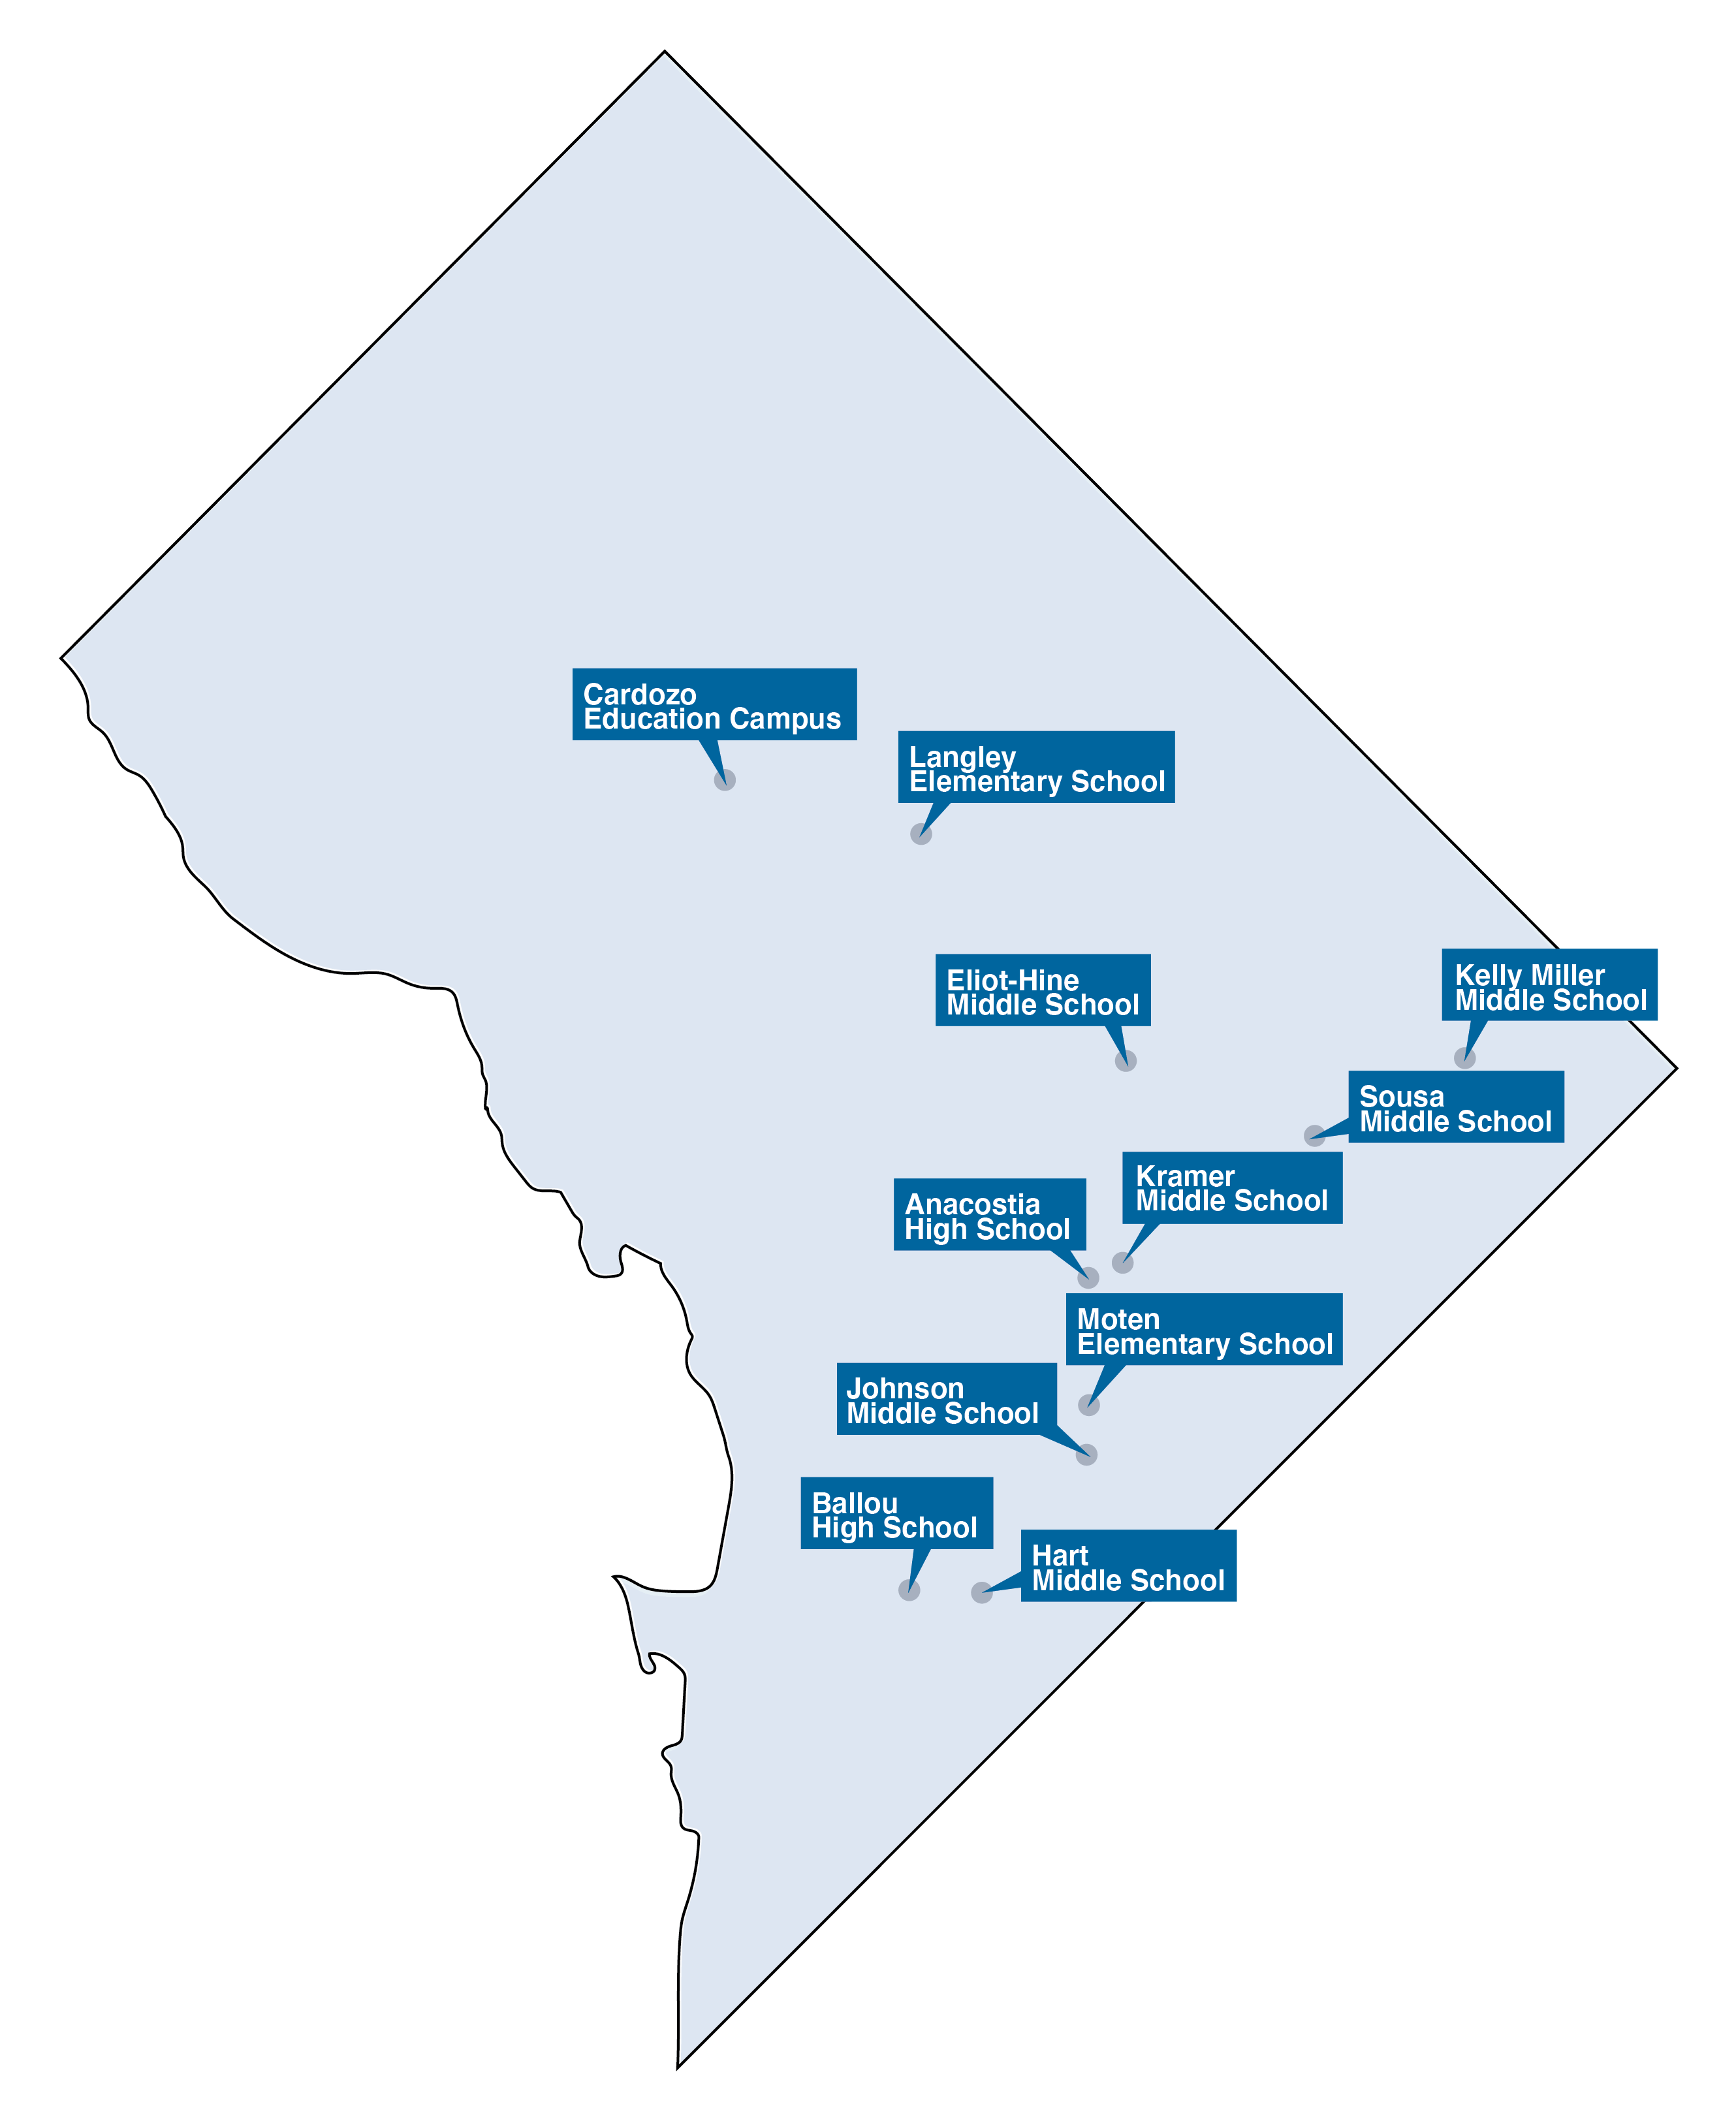 Map of the 11 schools across the city that have become resource hubs in their community